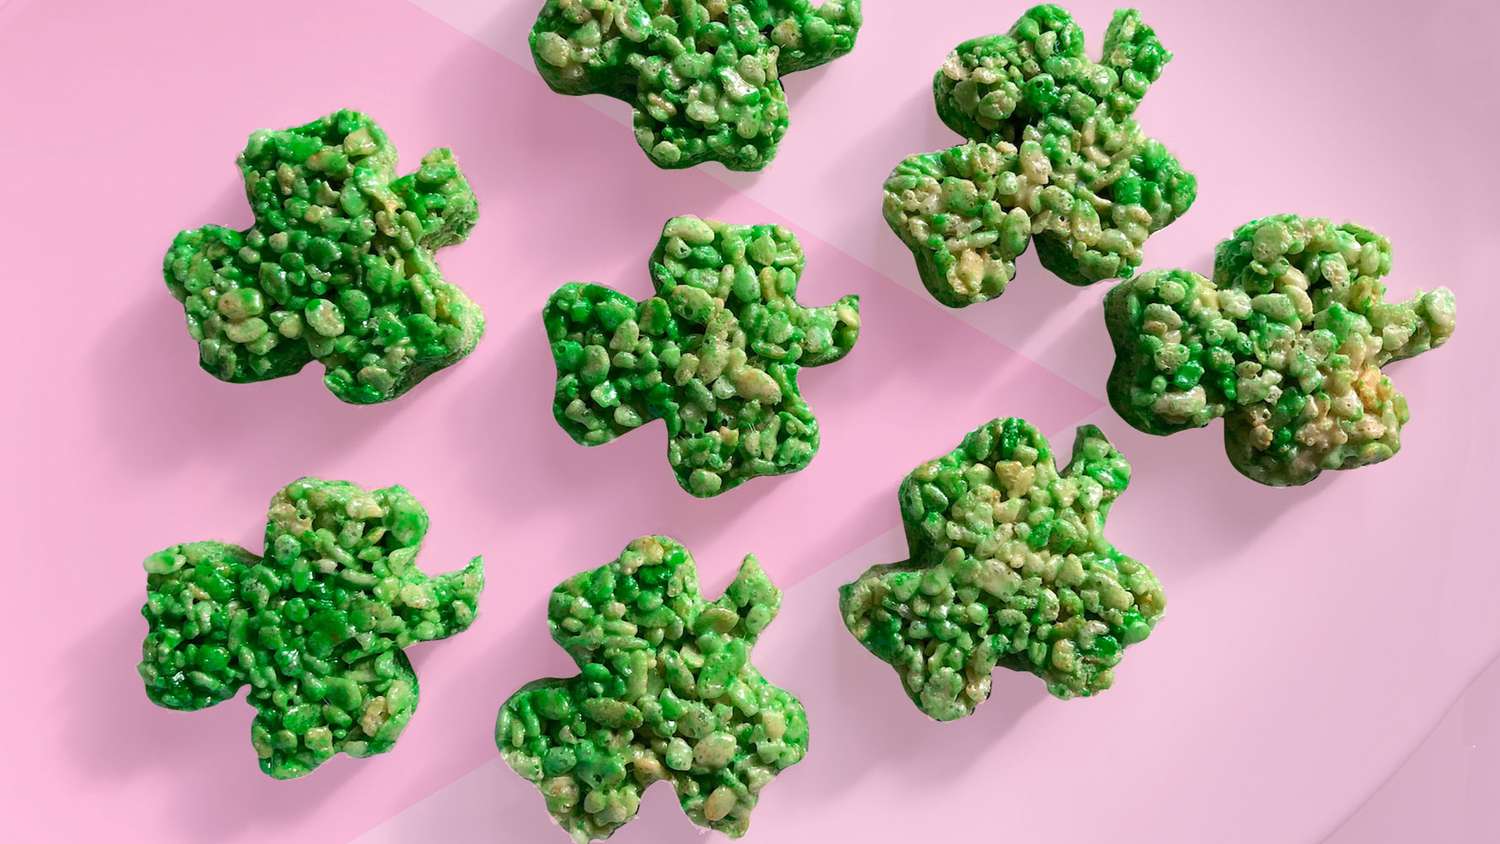 St. Patrick's Day snacks, party food, and treats - Rice Krispies Treats